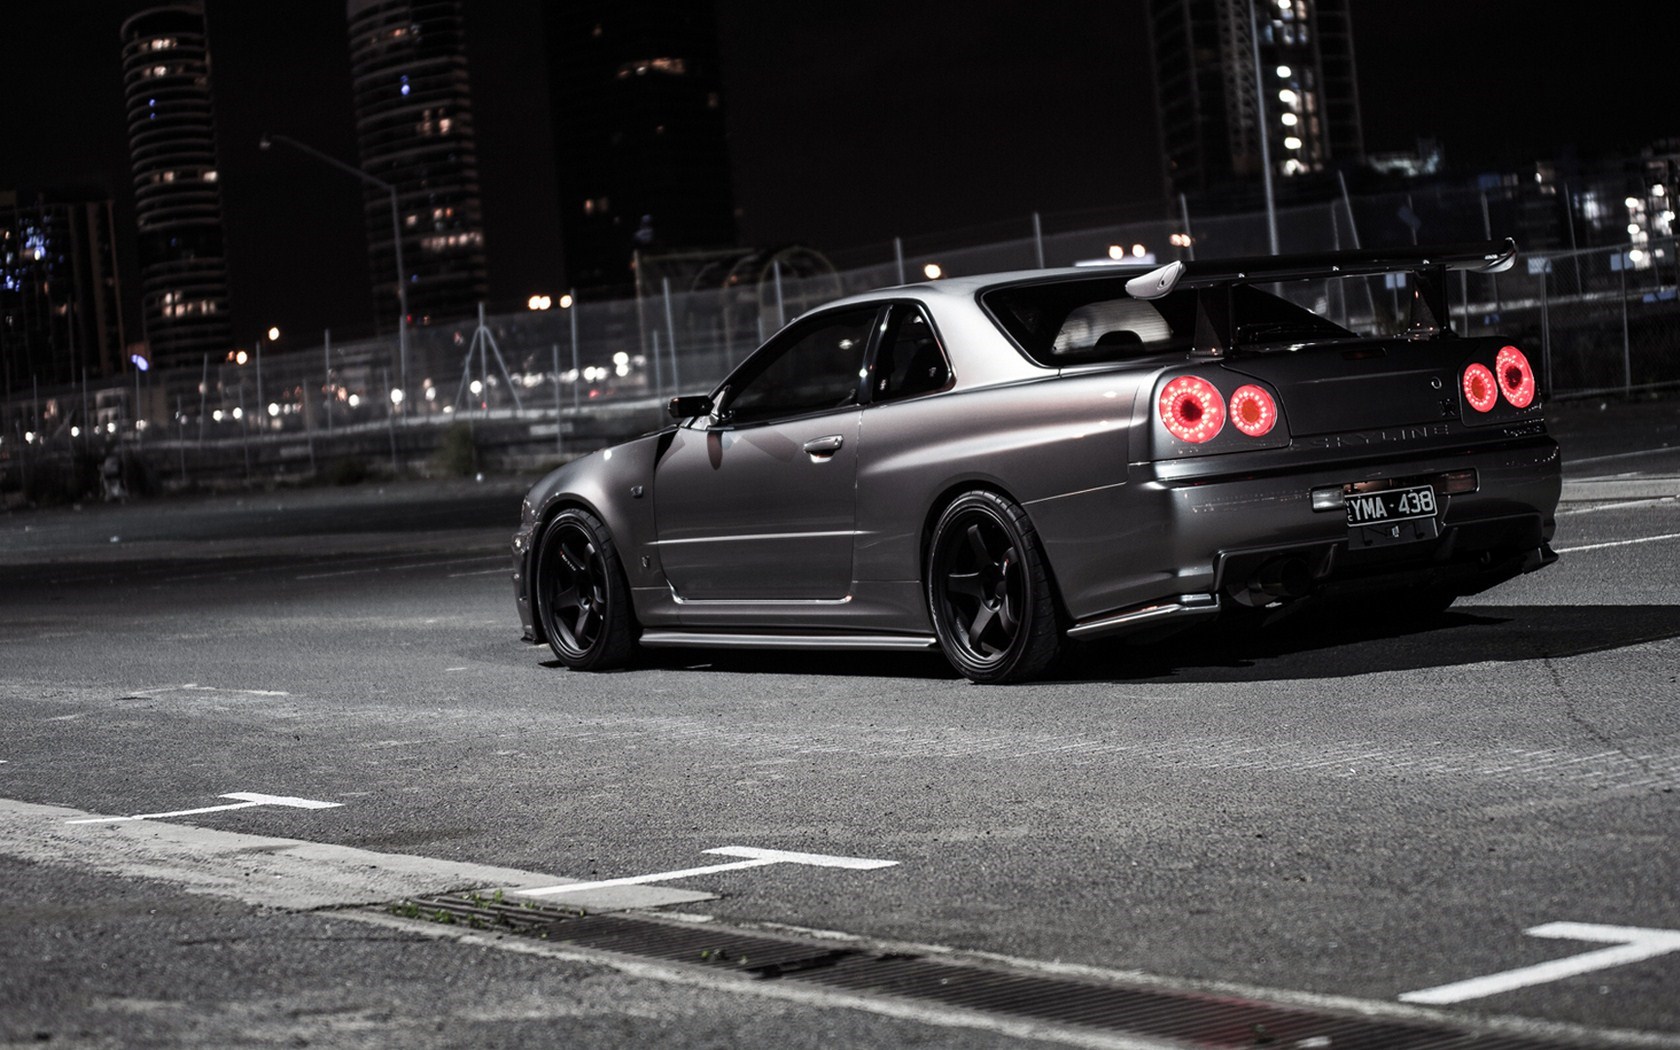 Picture 2016, Nissan Slyline R34 Street Racing Car Wallpaper